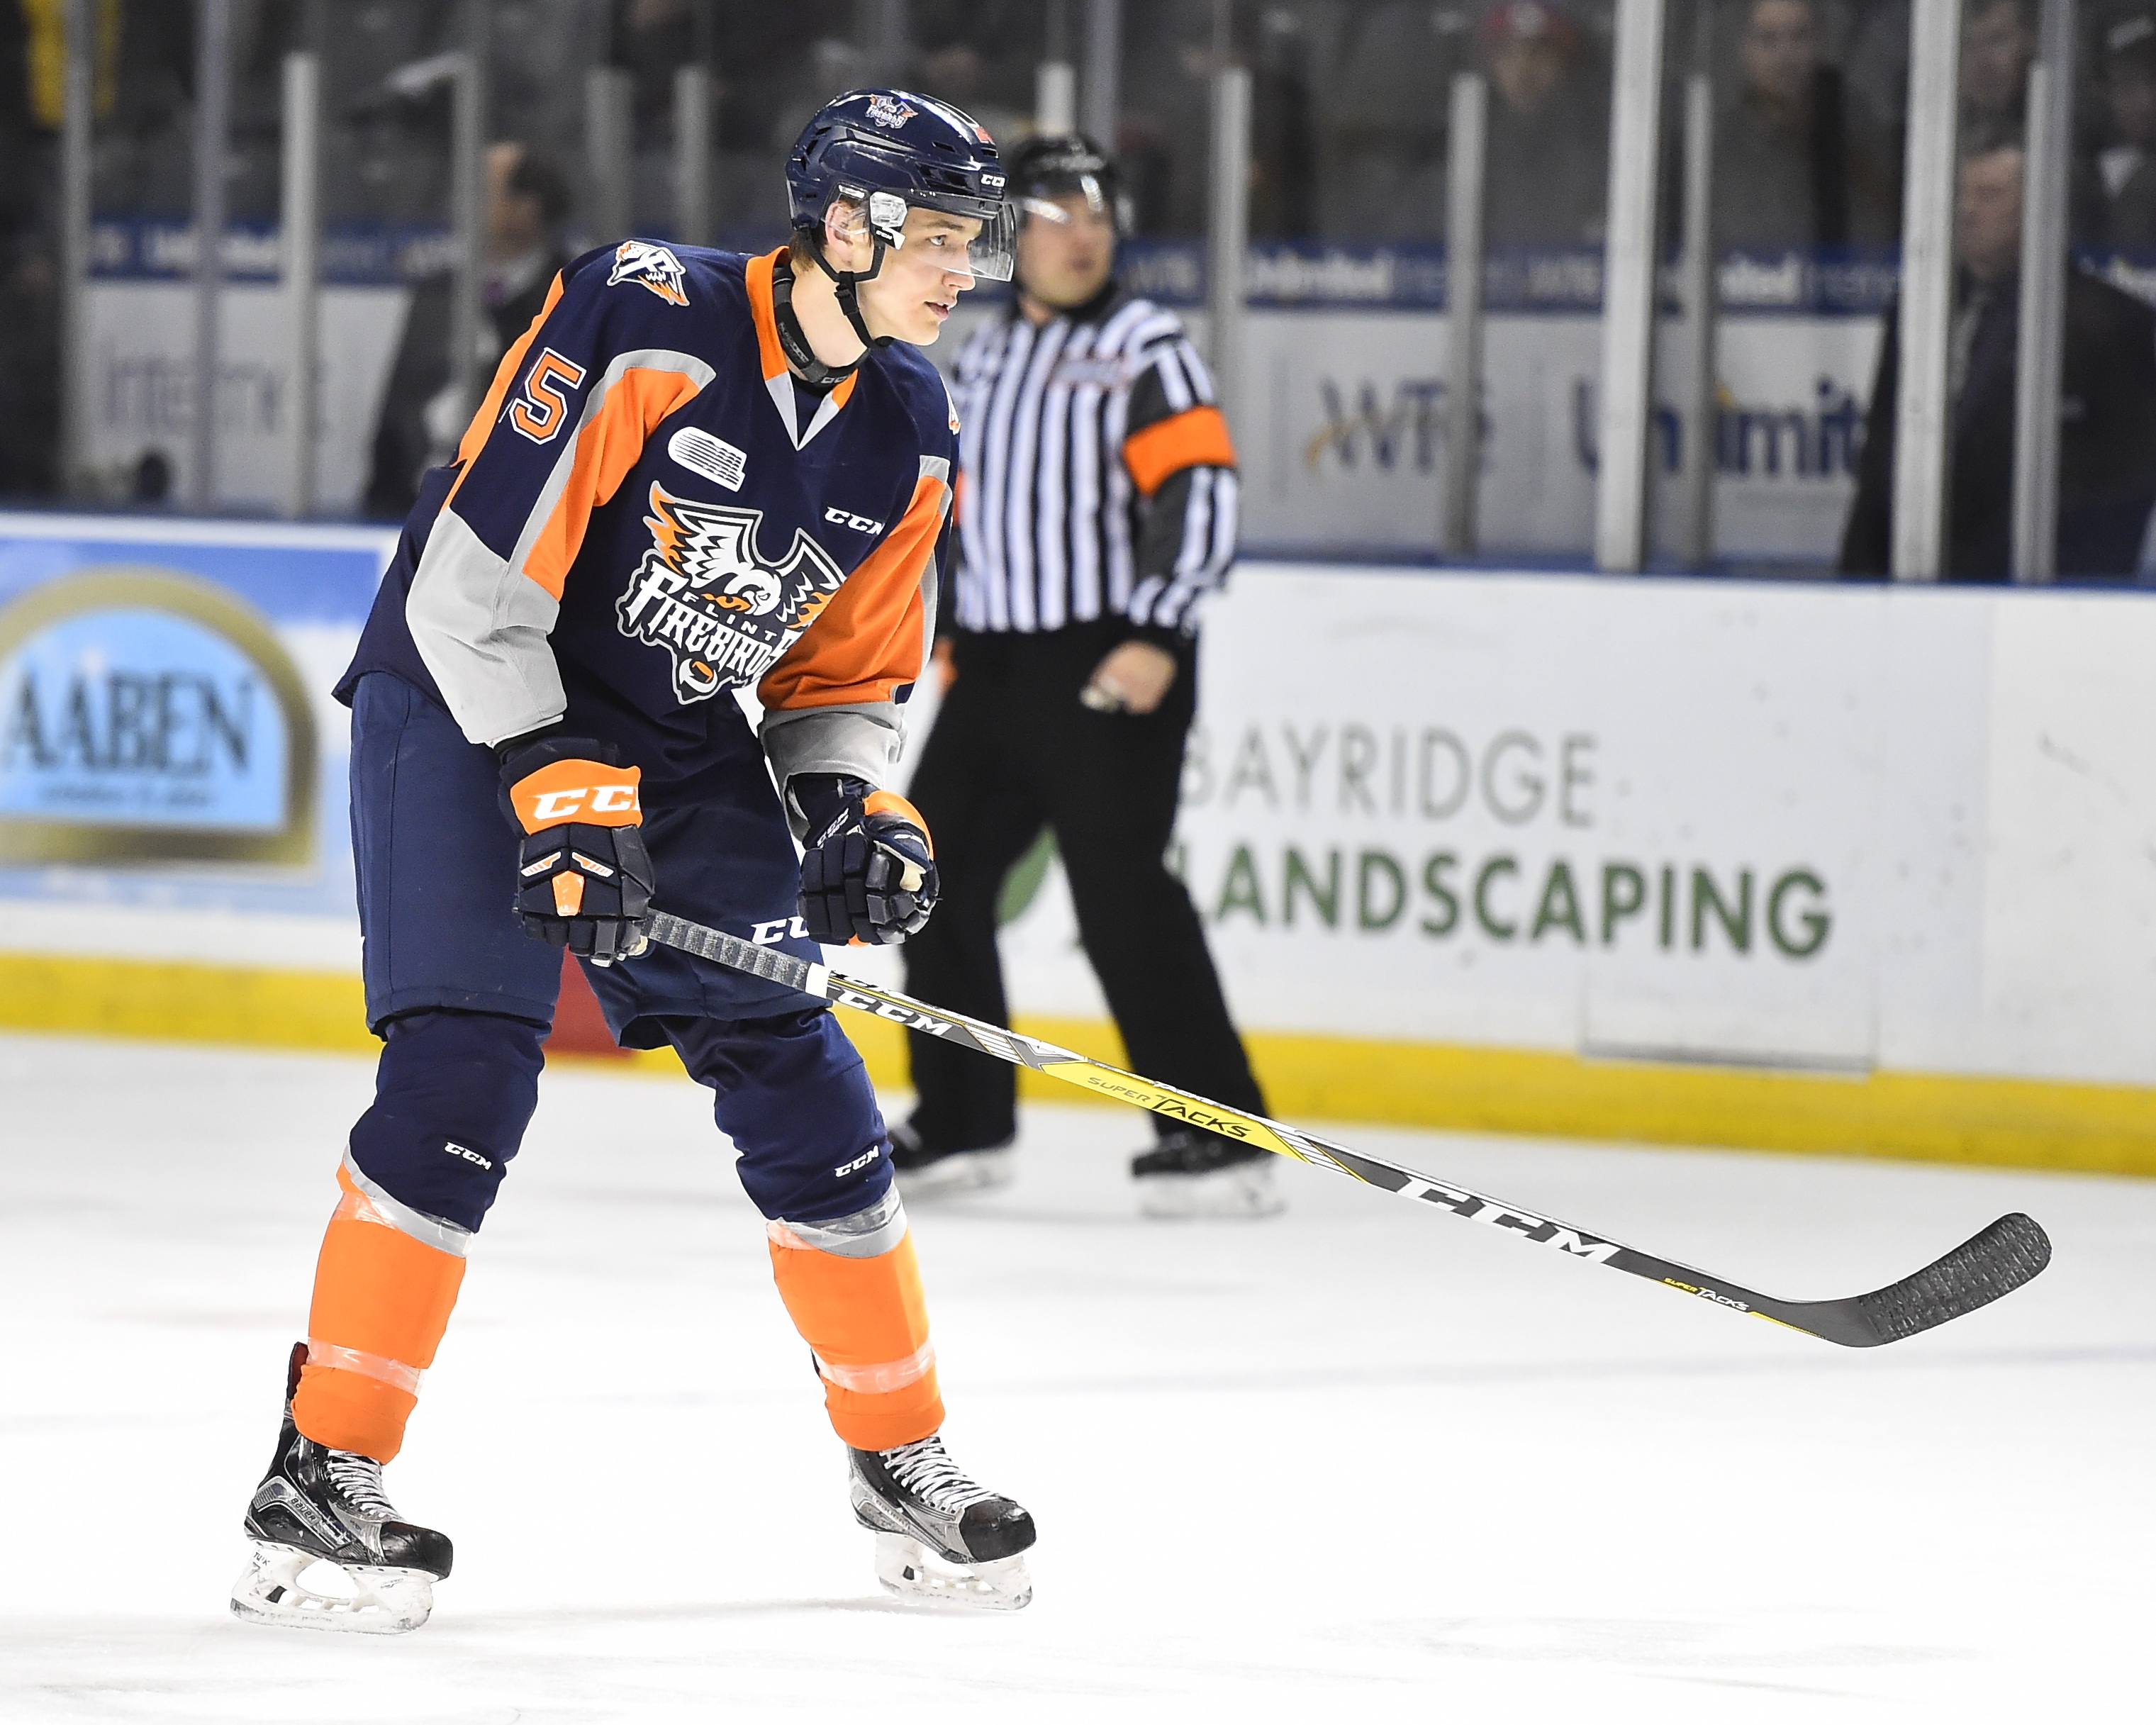 Fedor Gordeev of the Flint Firebirds. Photo by Aaron Bell/OHL Images